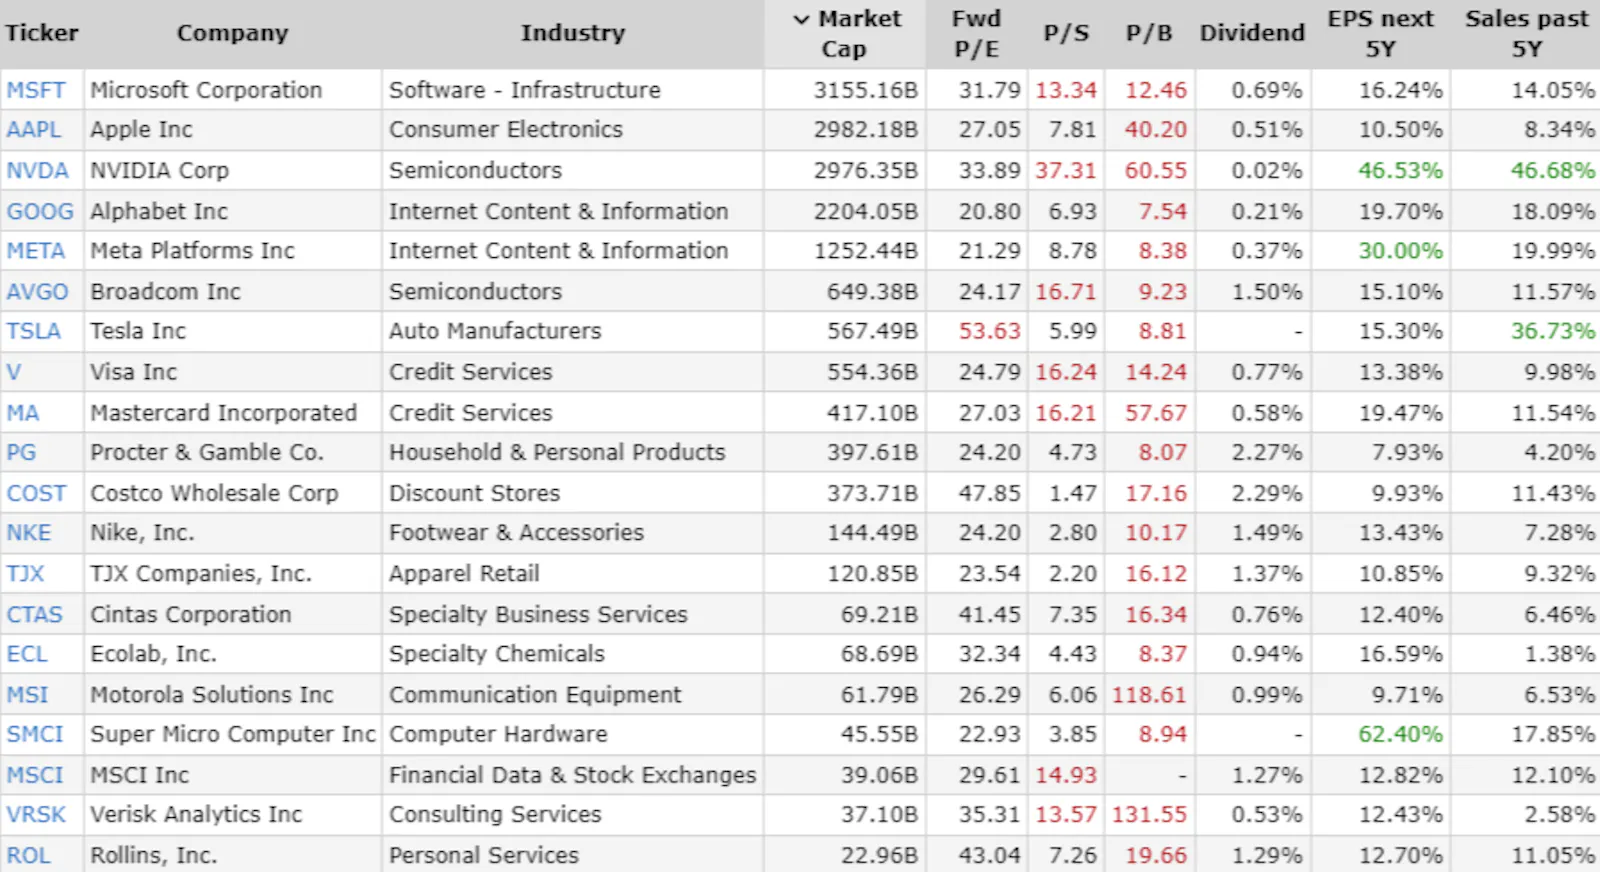 tenbagger stocks that tenfold over the past decade or more.